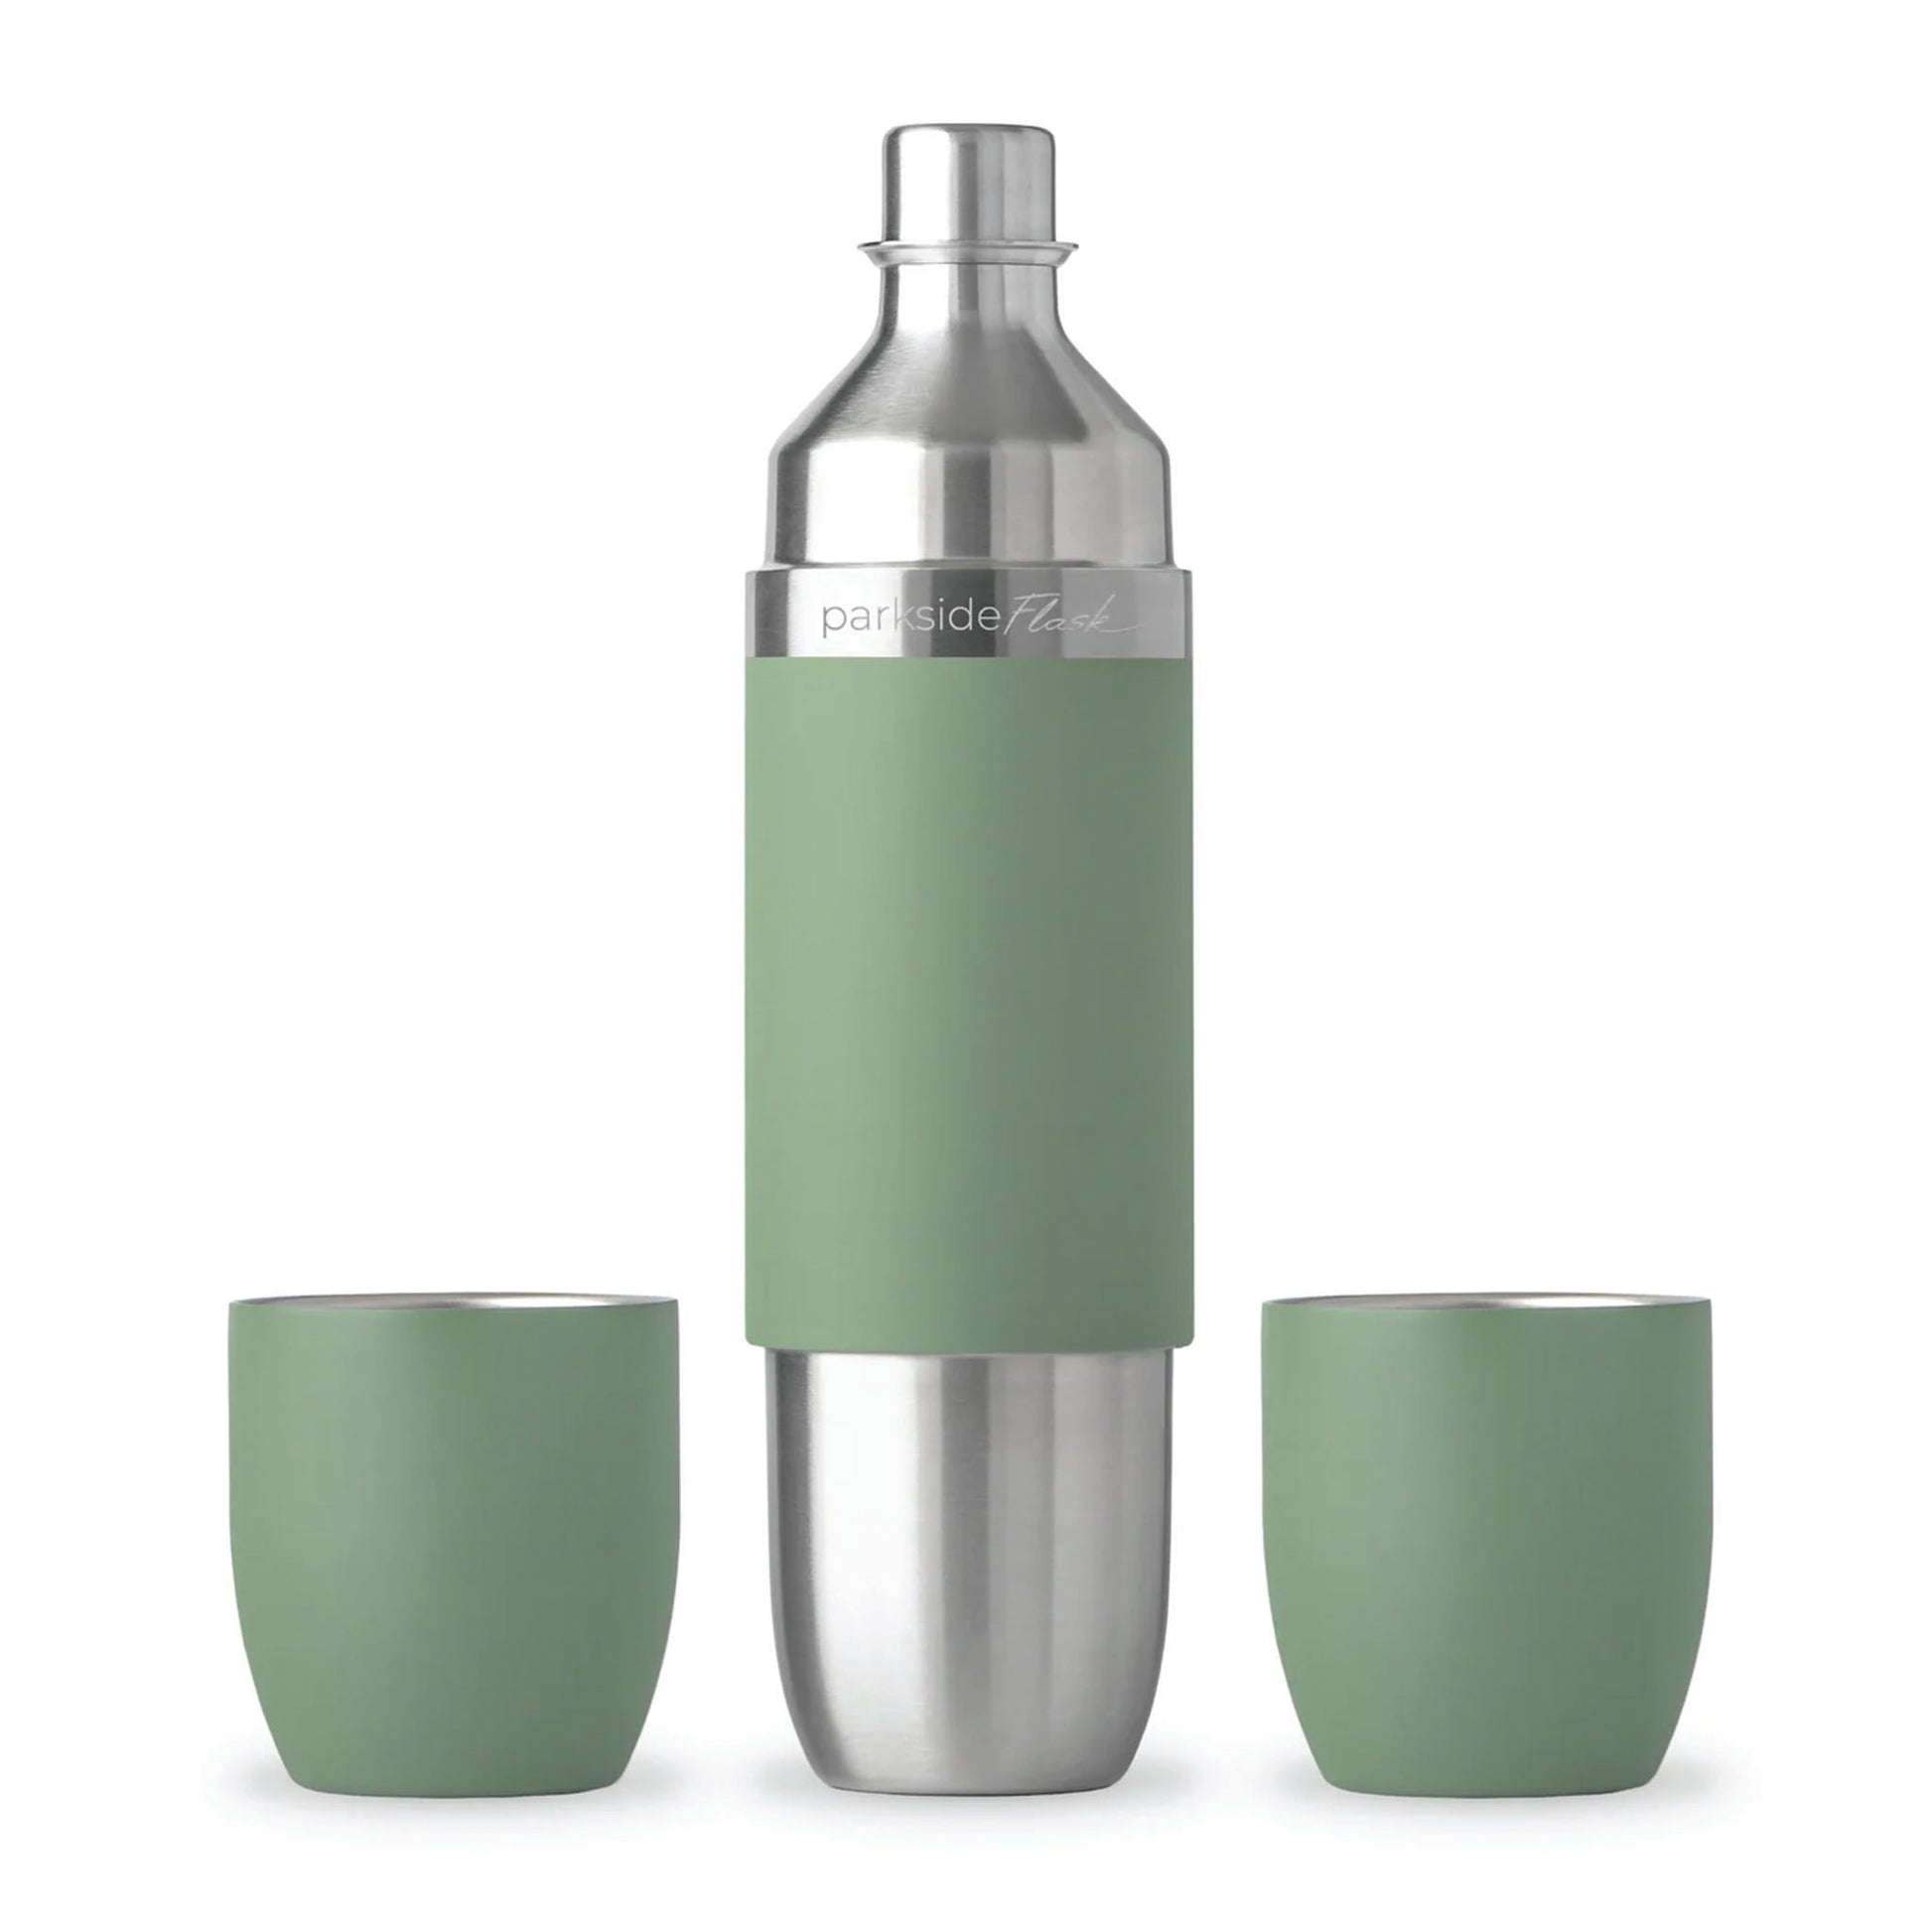 High Camp Flasks  Outdoor Flasks, Tumblers & Cocktail Shakers